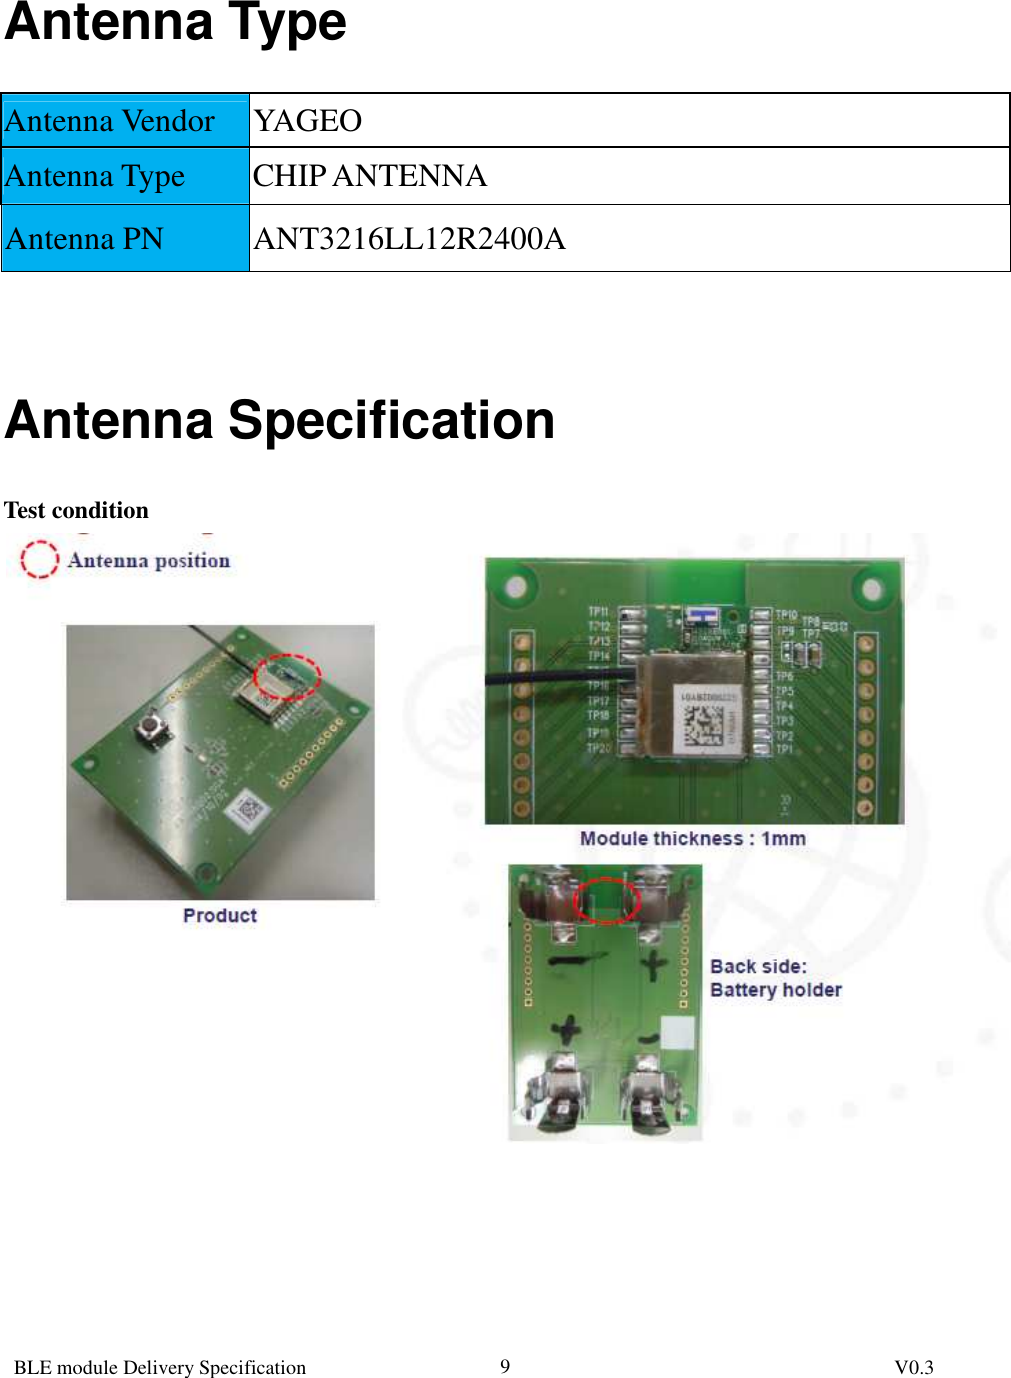  BLE module Delivery Specification          V0.3 9Antenna Type Antenna Vendor  YAGEO Antenna Type  CHIP ANTENNA Antenna PN  ANT3216LL12R2400A   Antenna Specification Test condition       